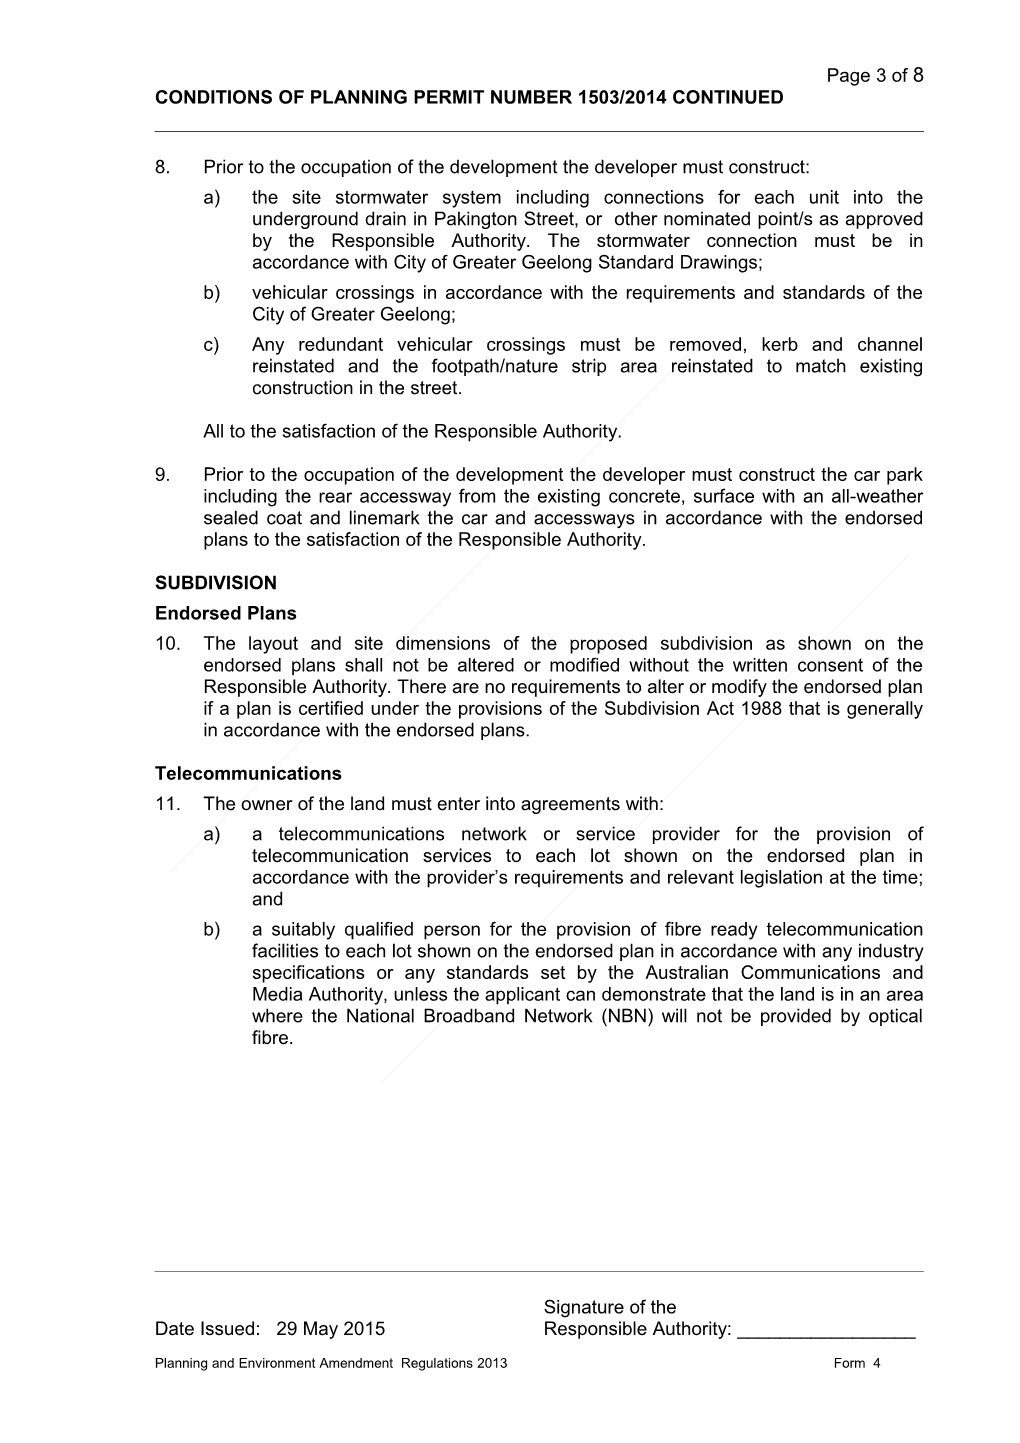 Conditions of Planning Permit Number 1503/2014 Continued